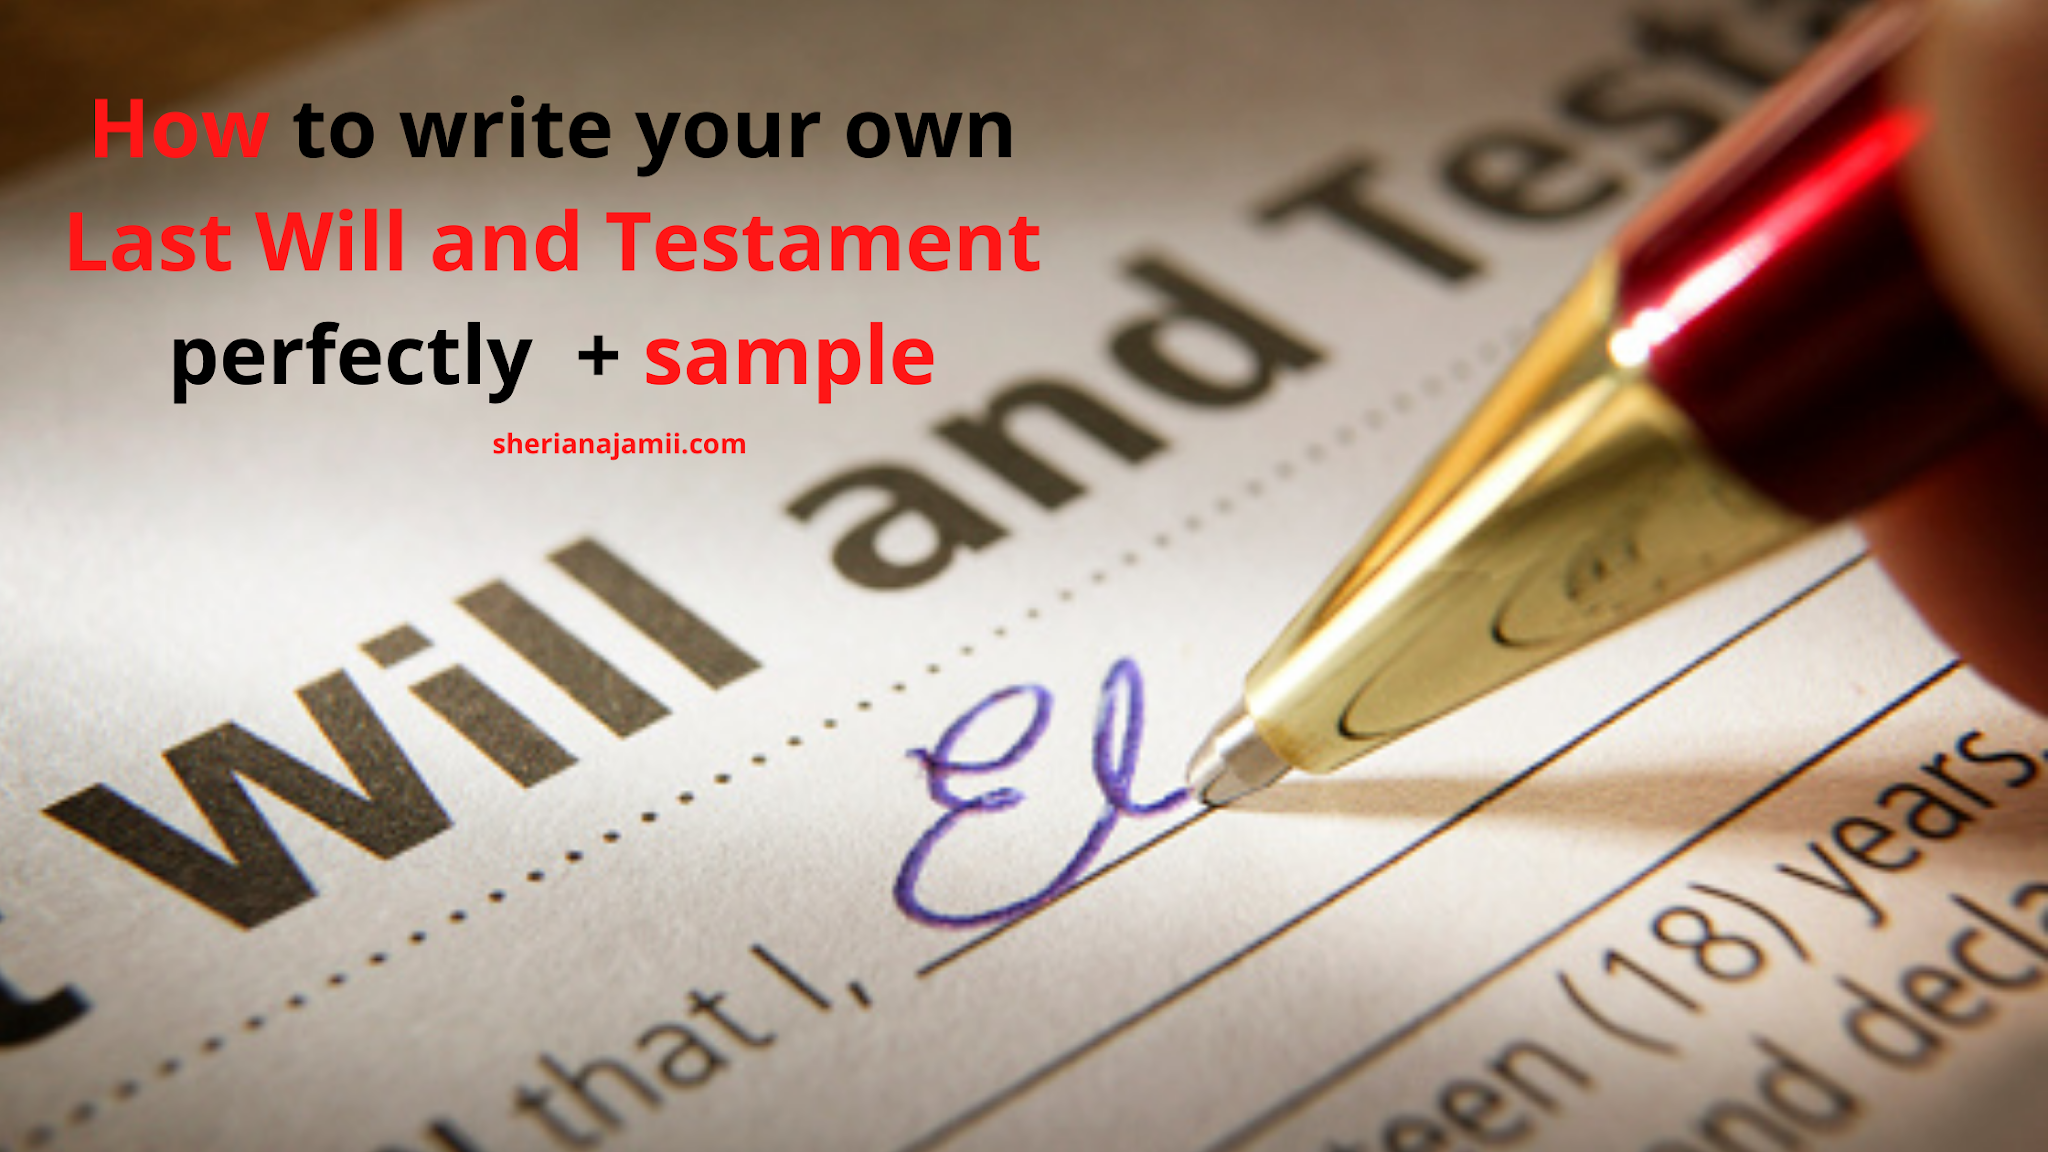 How to write your own Last Will and Testament perfectly + sample